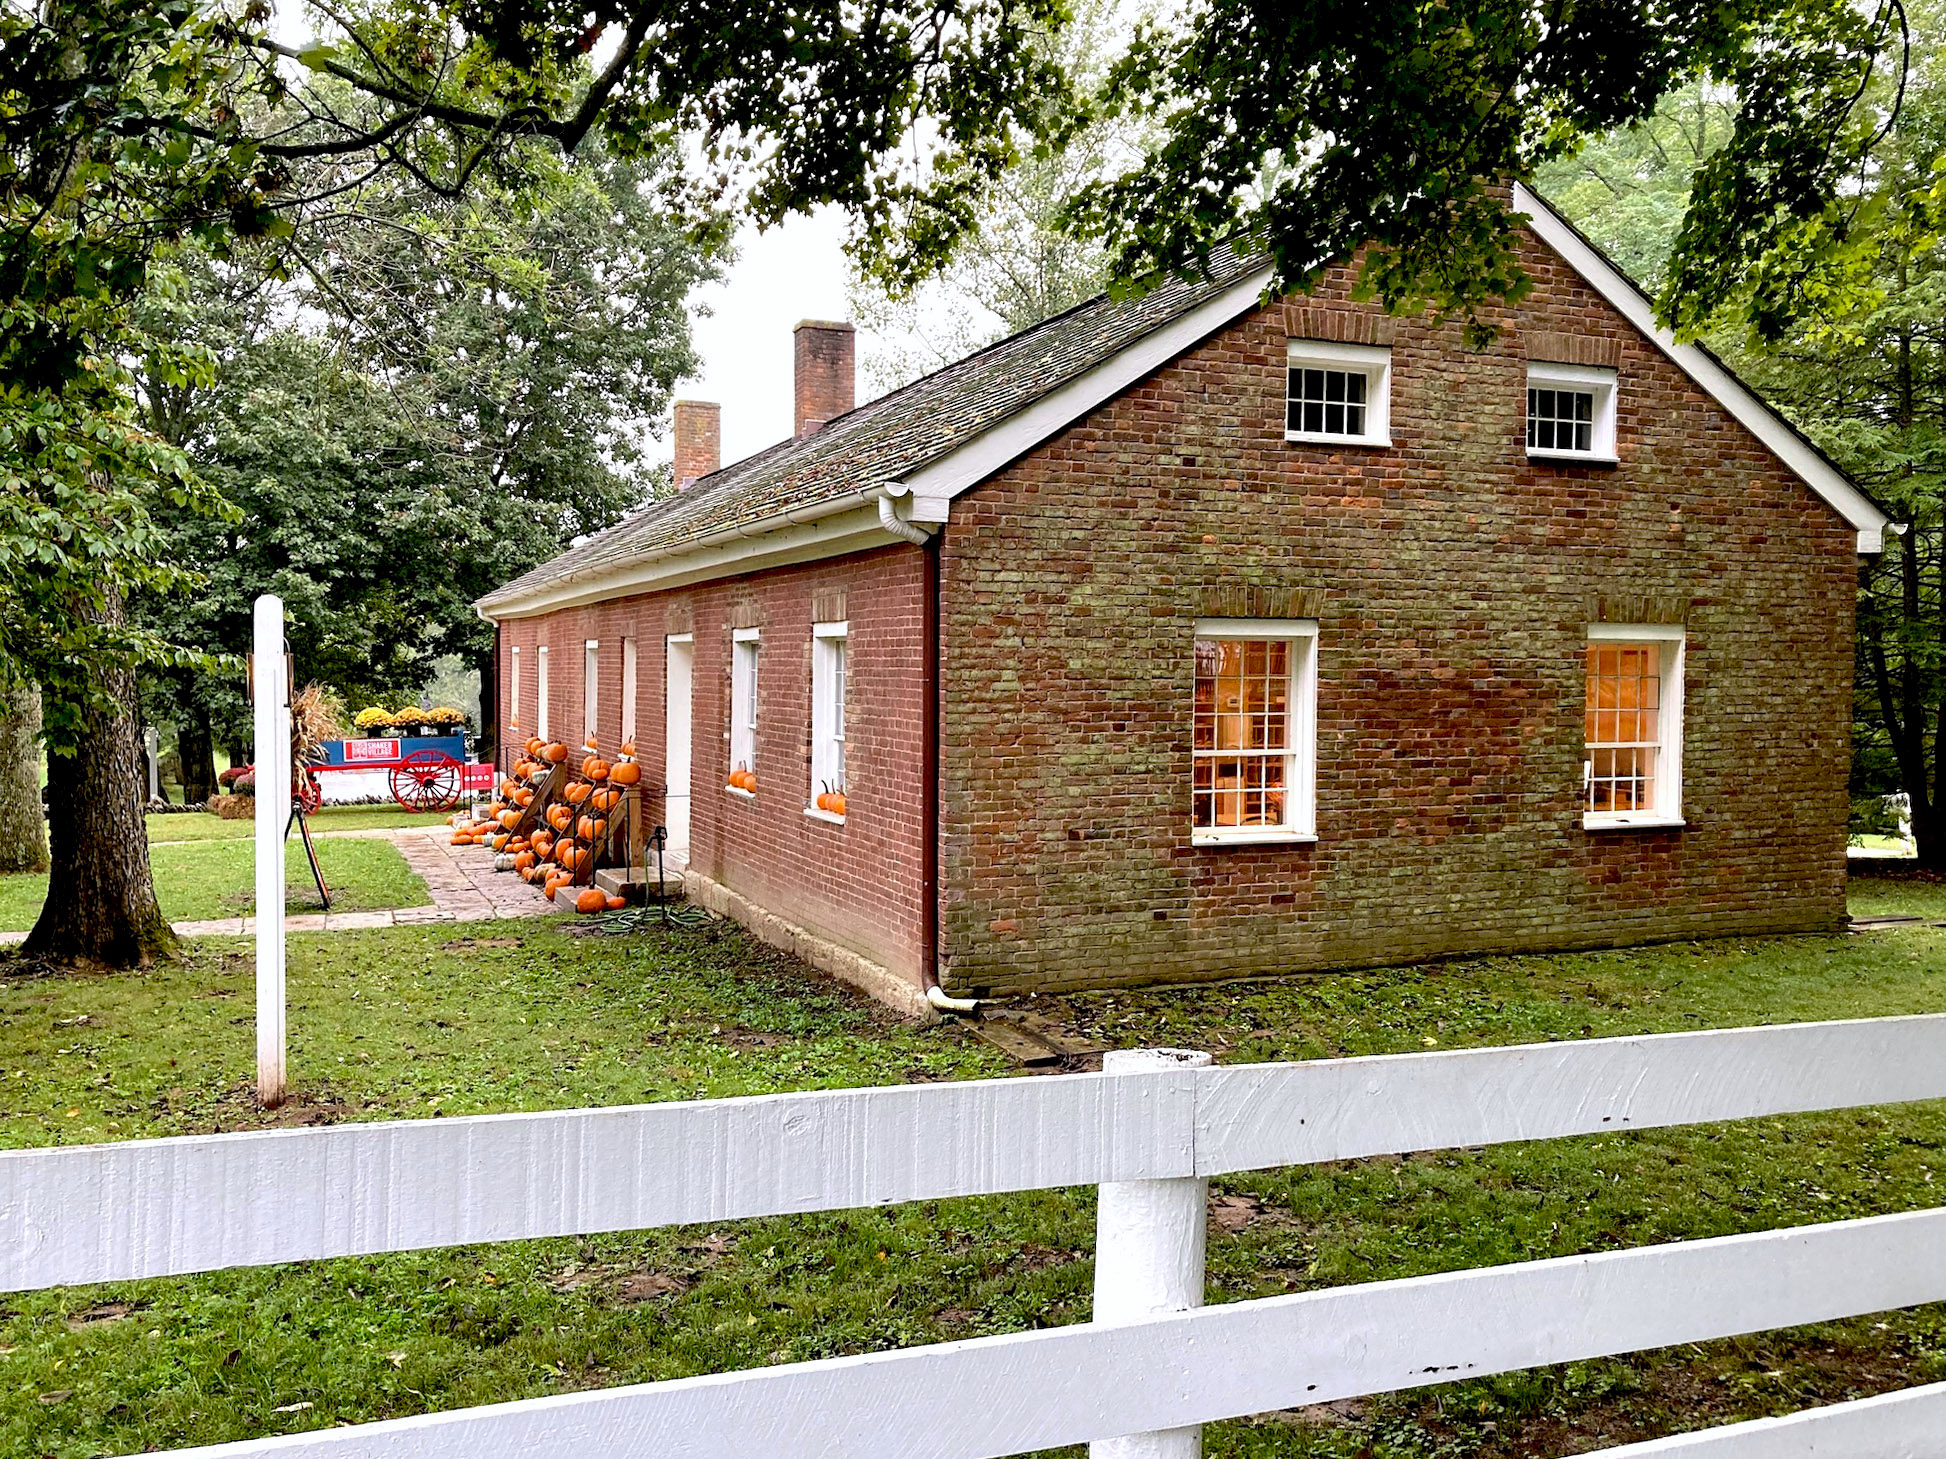 visit shaker village welcome center to start your tour